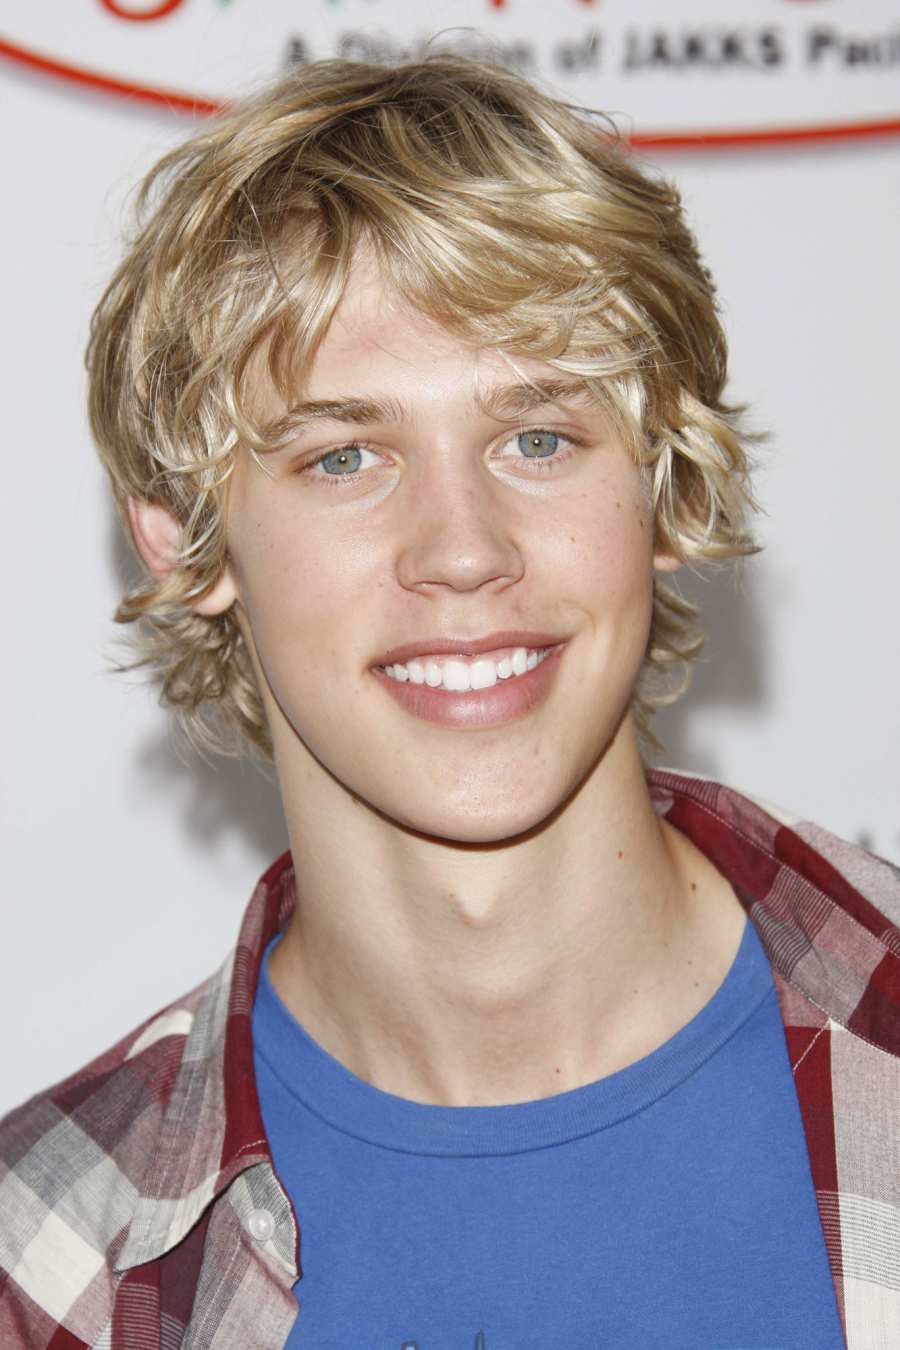 Austin Butler Through Years From Nickelodeon Star Playing Elvis Presley